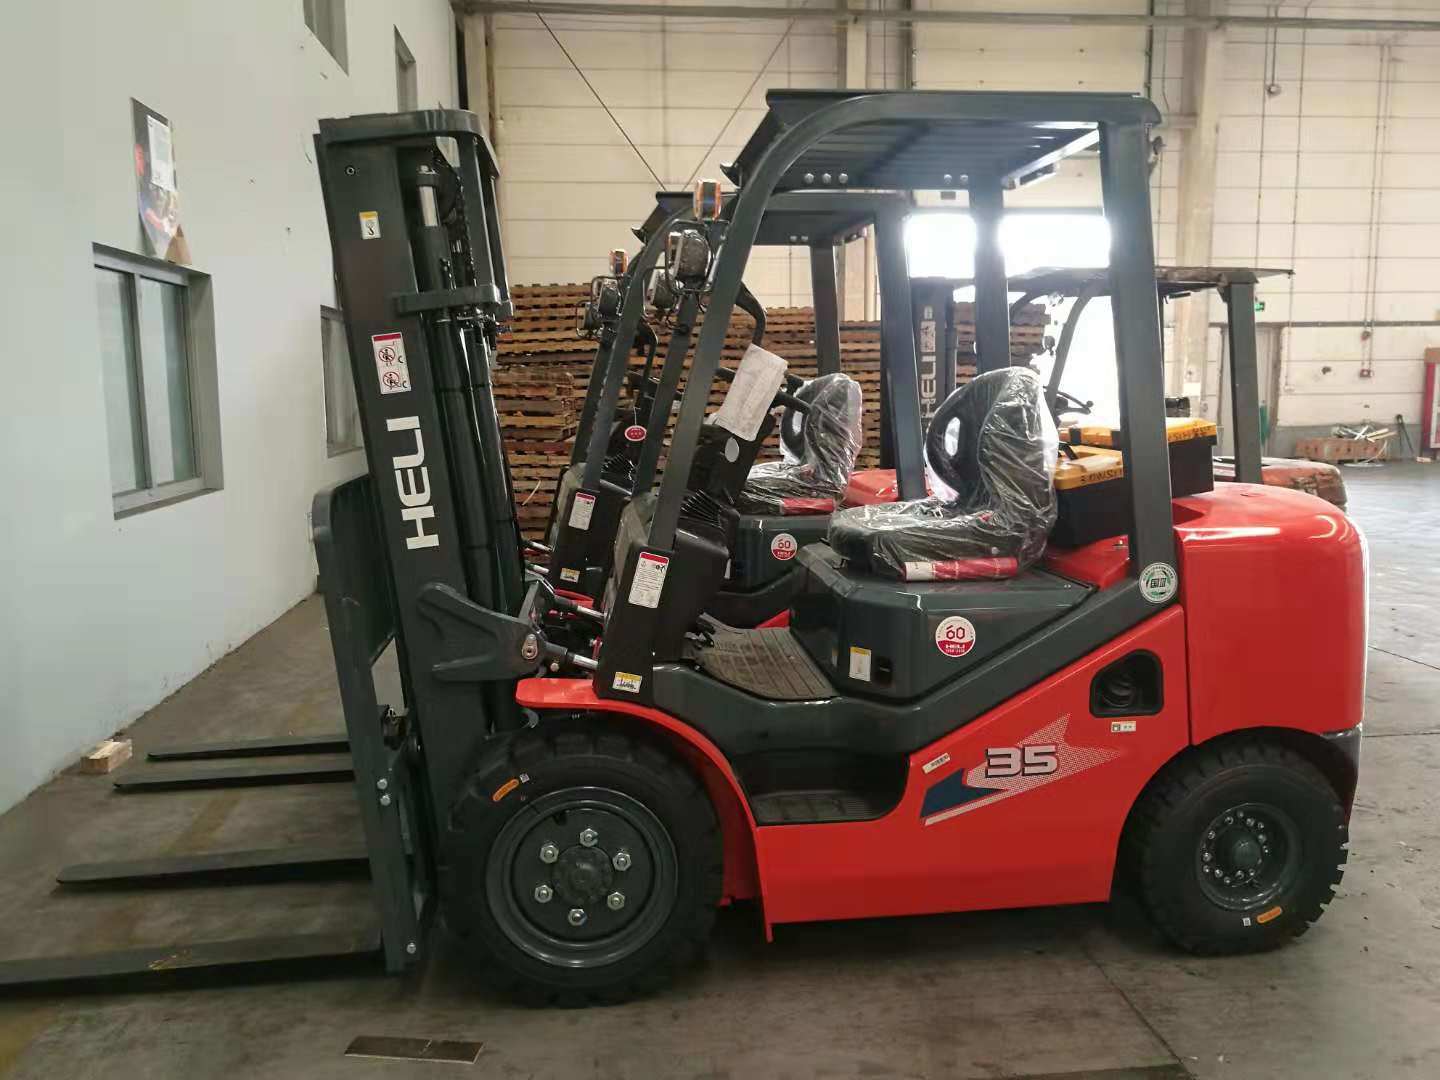 China Top Forklift Brand Heli 3.5 Ton Diesel Forklift Cpcd35